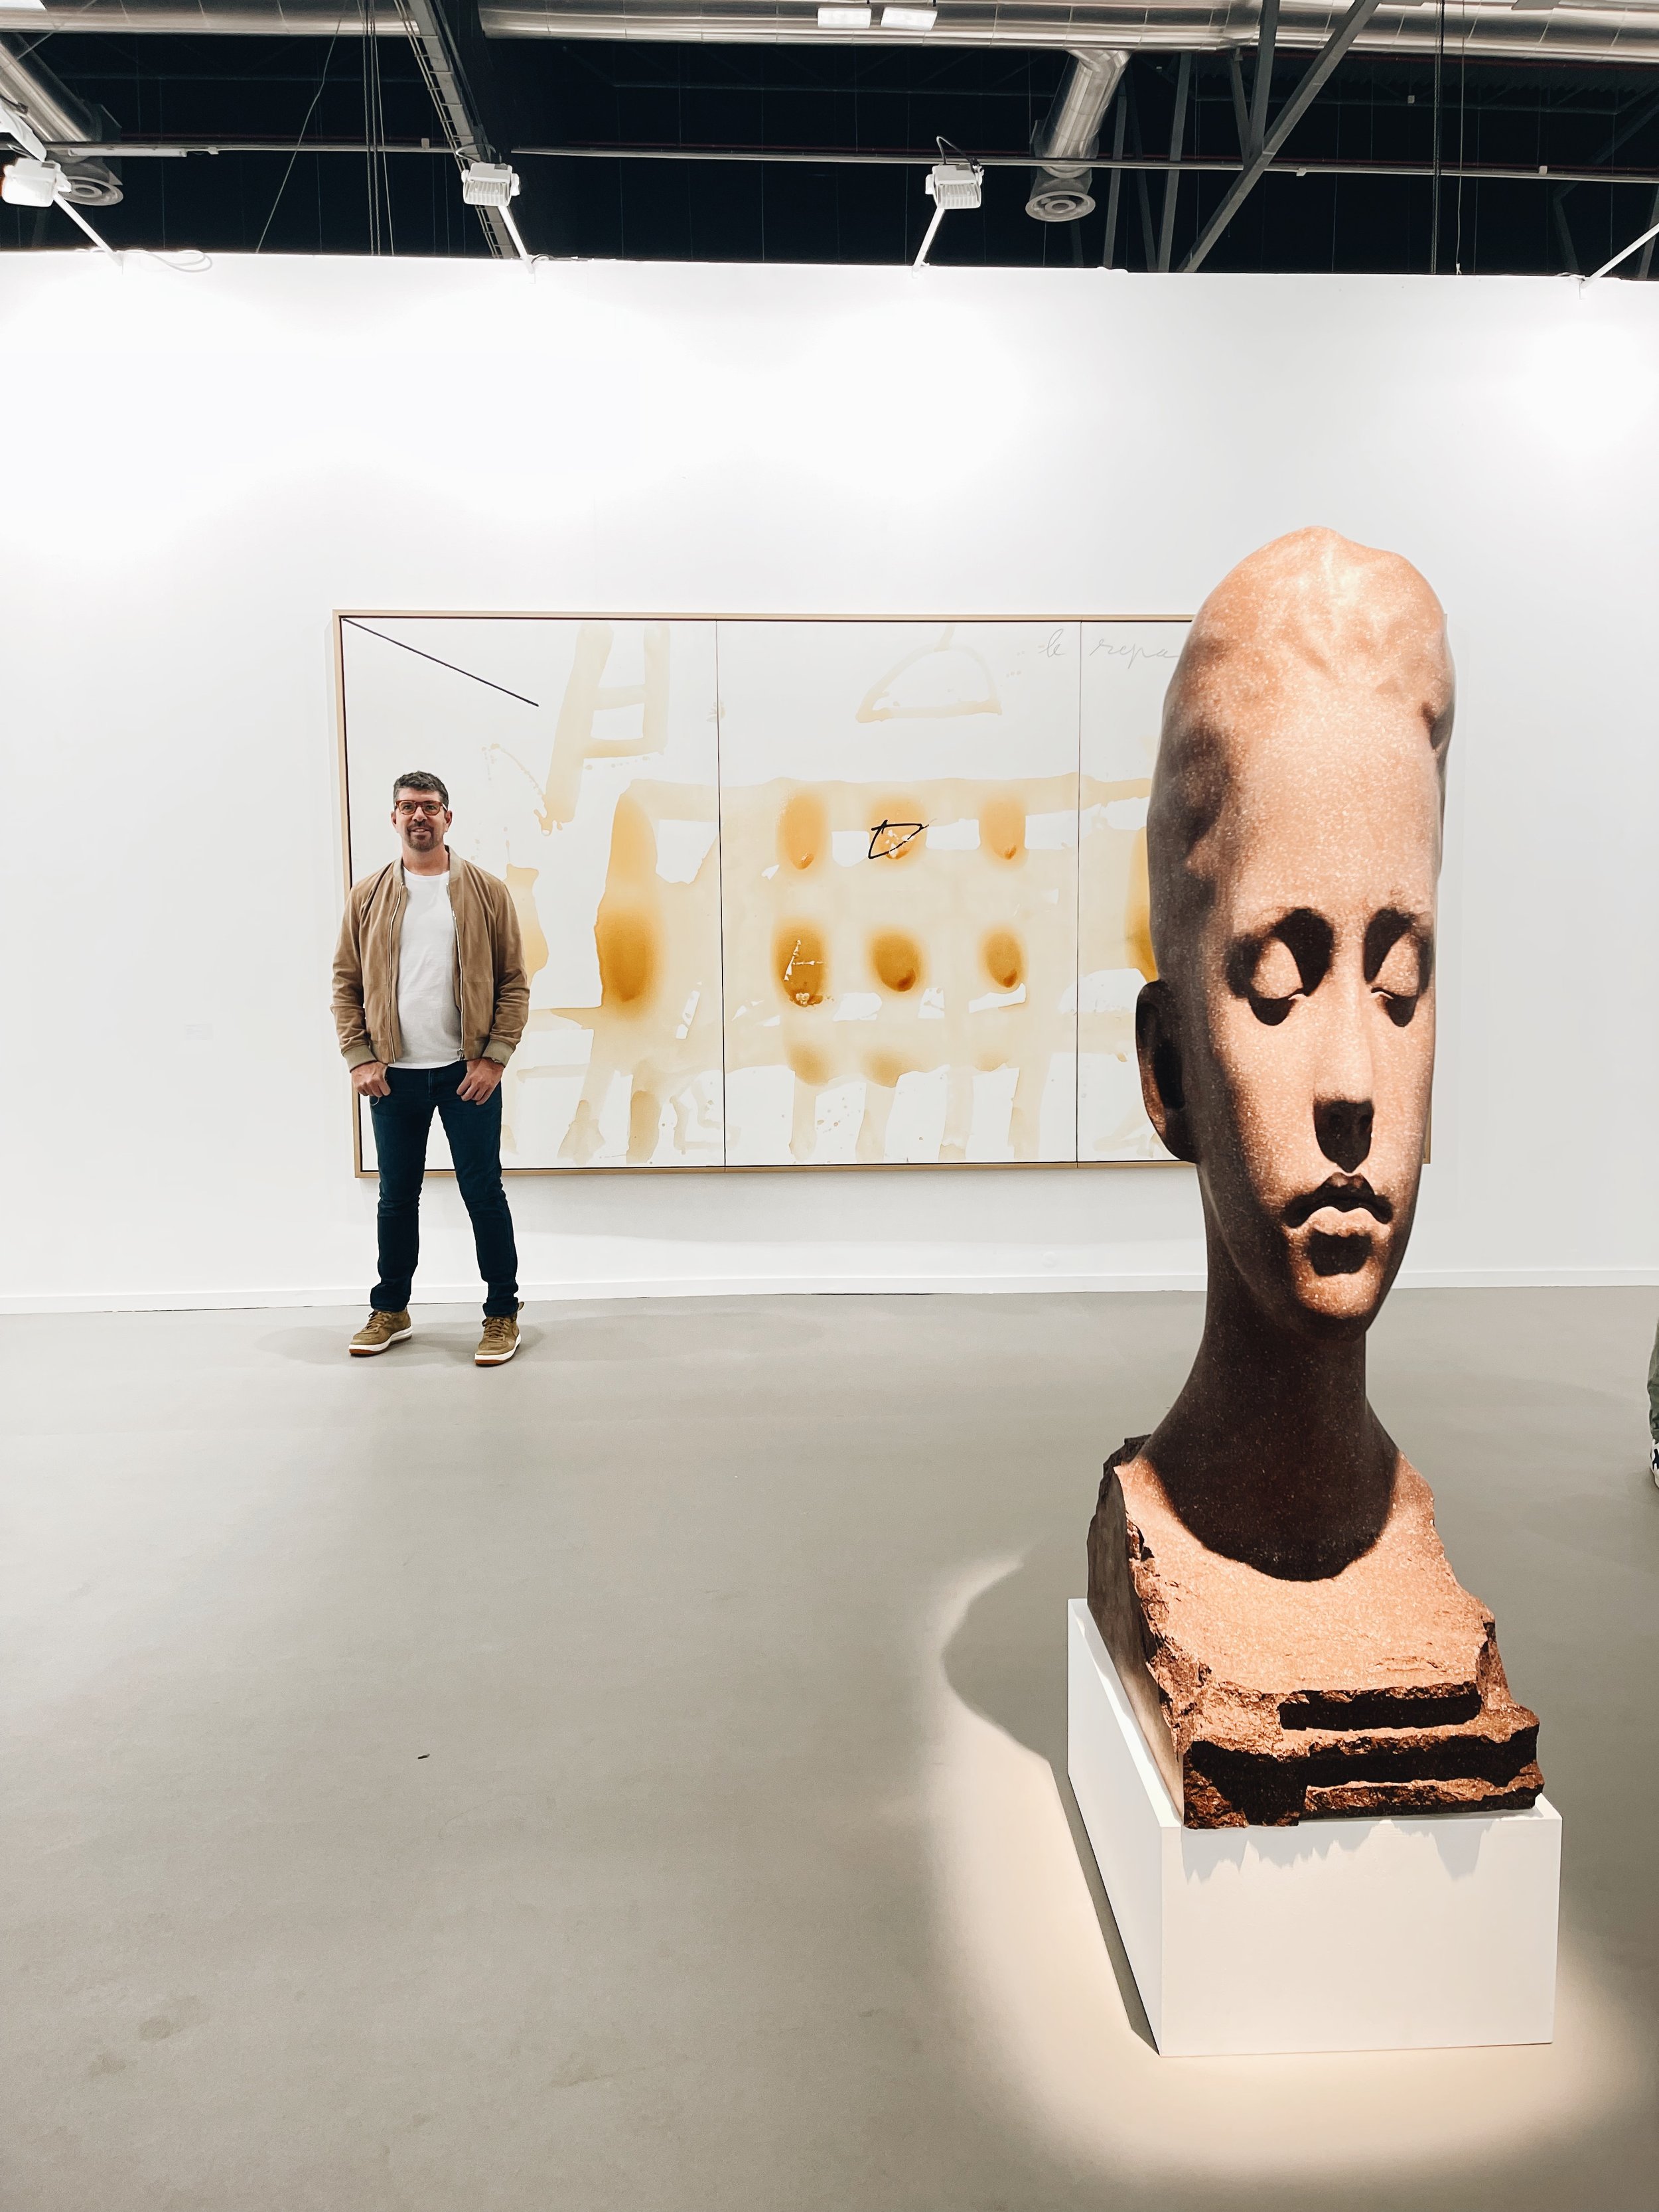 Alex pictured between showstopping pieces by Tàpies and a Plensa 